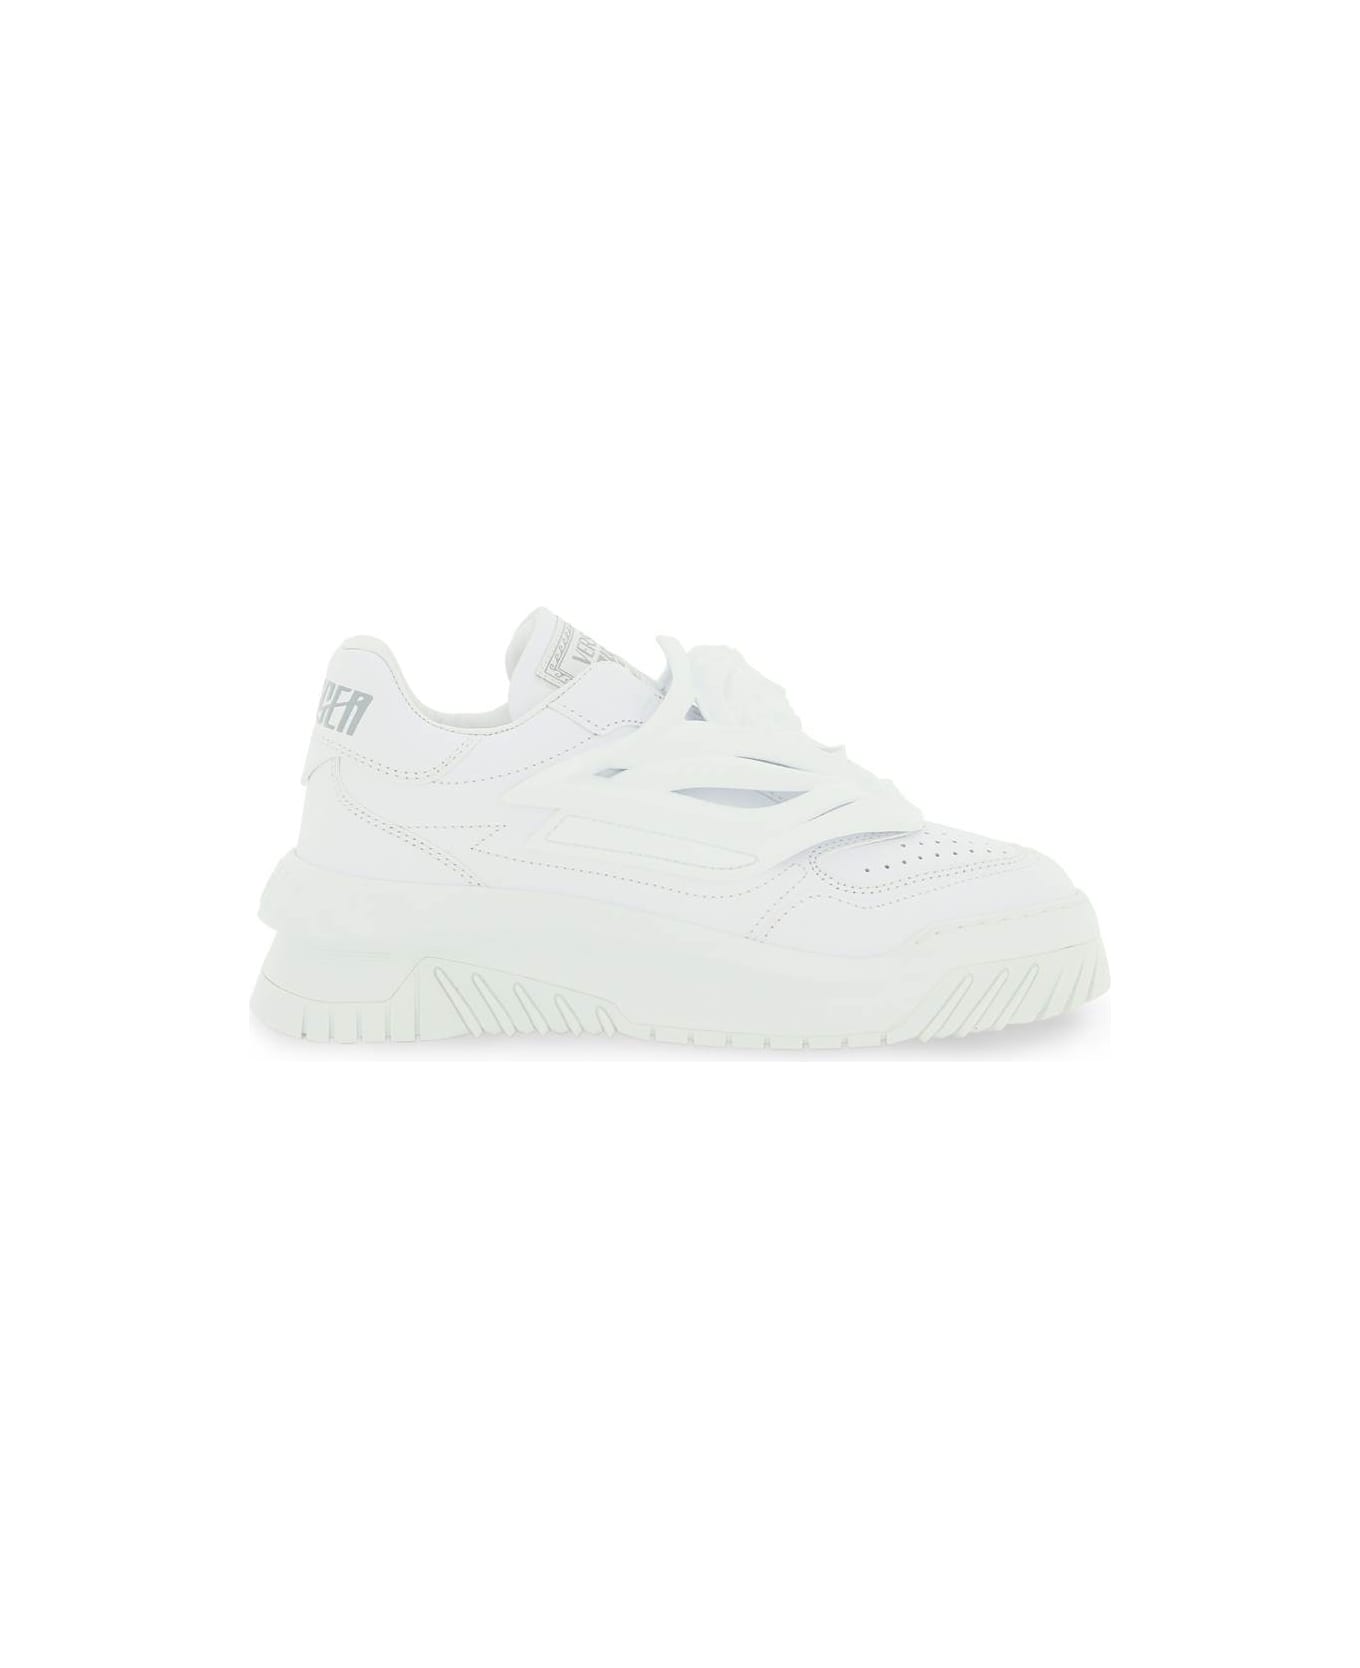 Versace Odissea Sneakers - White